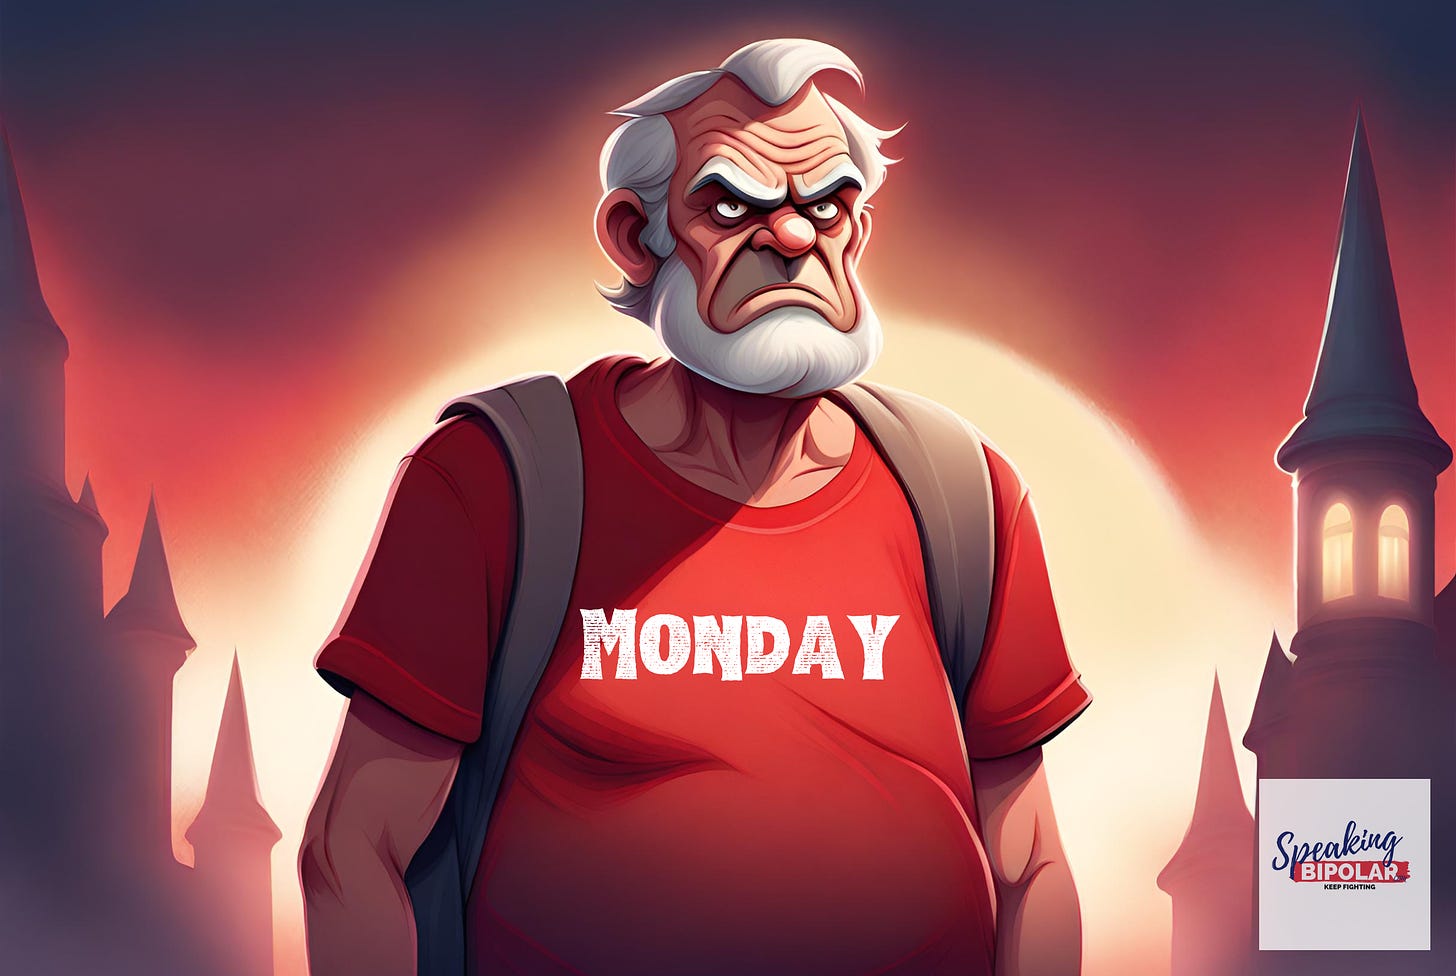 Illustration of a grumpy man wearing a T-shirt with the word Monday printed on it